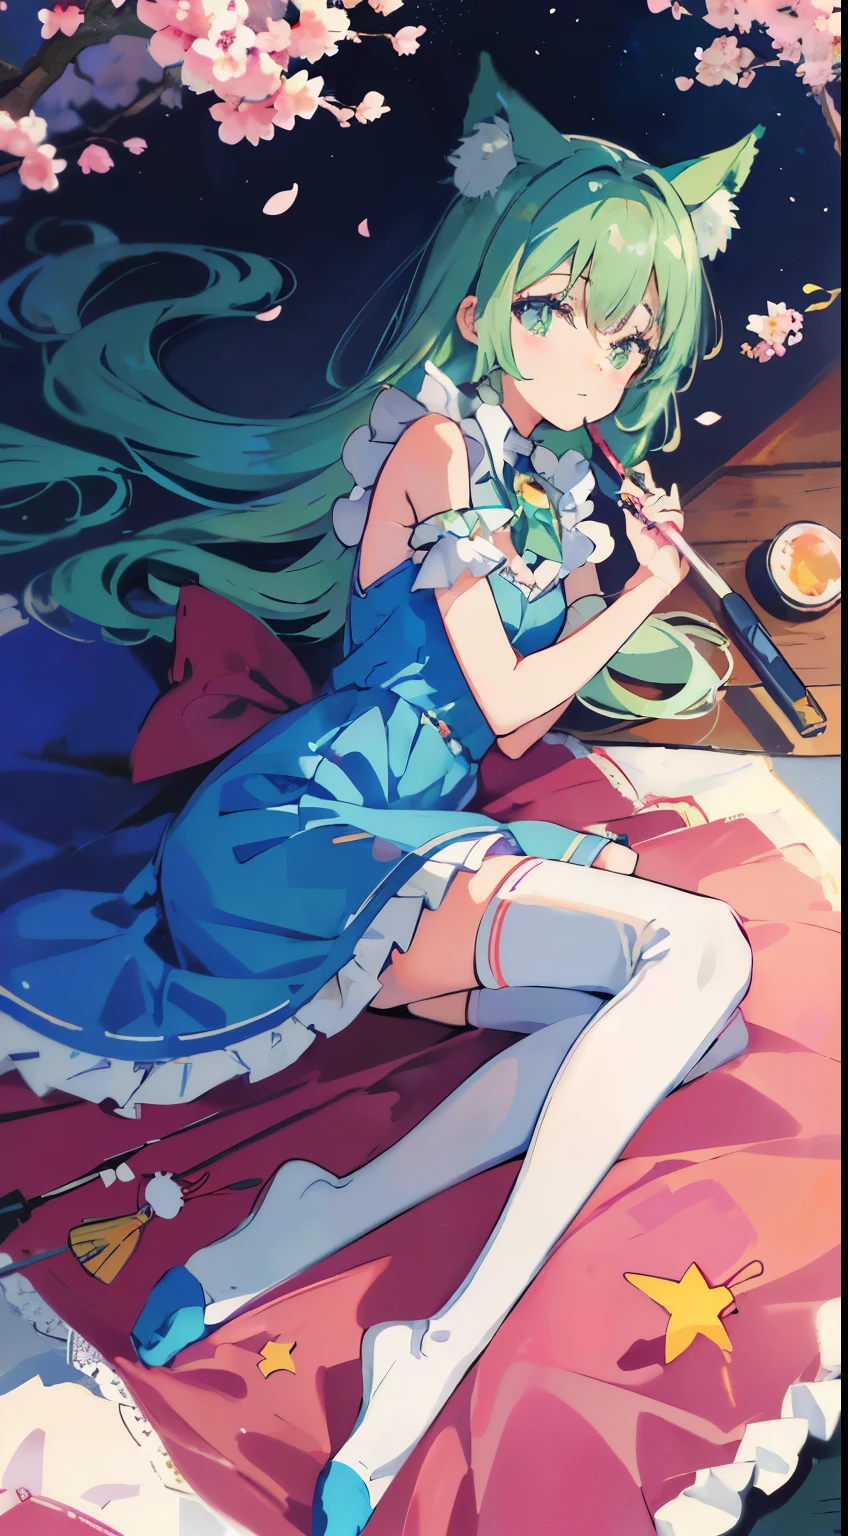 ((table top, highest quality: 1.1), ((Anime girl in a blue dress with a magic wand)), art nouveau、Anime cat girl in maid outfit, , ((Green hairs))、long haired person、((Eyes that shine like jewels, long eyelashes, and transparency))、Very Beautiful Anime Neko Musume, anime cat girl, ((white knee highs)), charming cat girl, Cherry blossom viewing under the cherry trees,lying down、私nspired by Leiko 私kemura, Aya Takano color style, in ryuuou no oshigoto art style, ((Cat ear)), smile